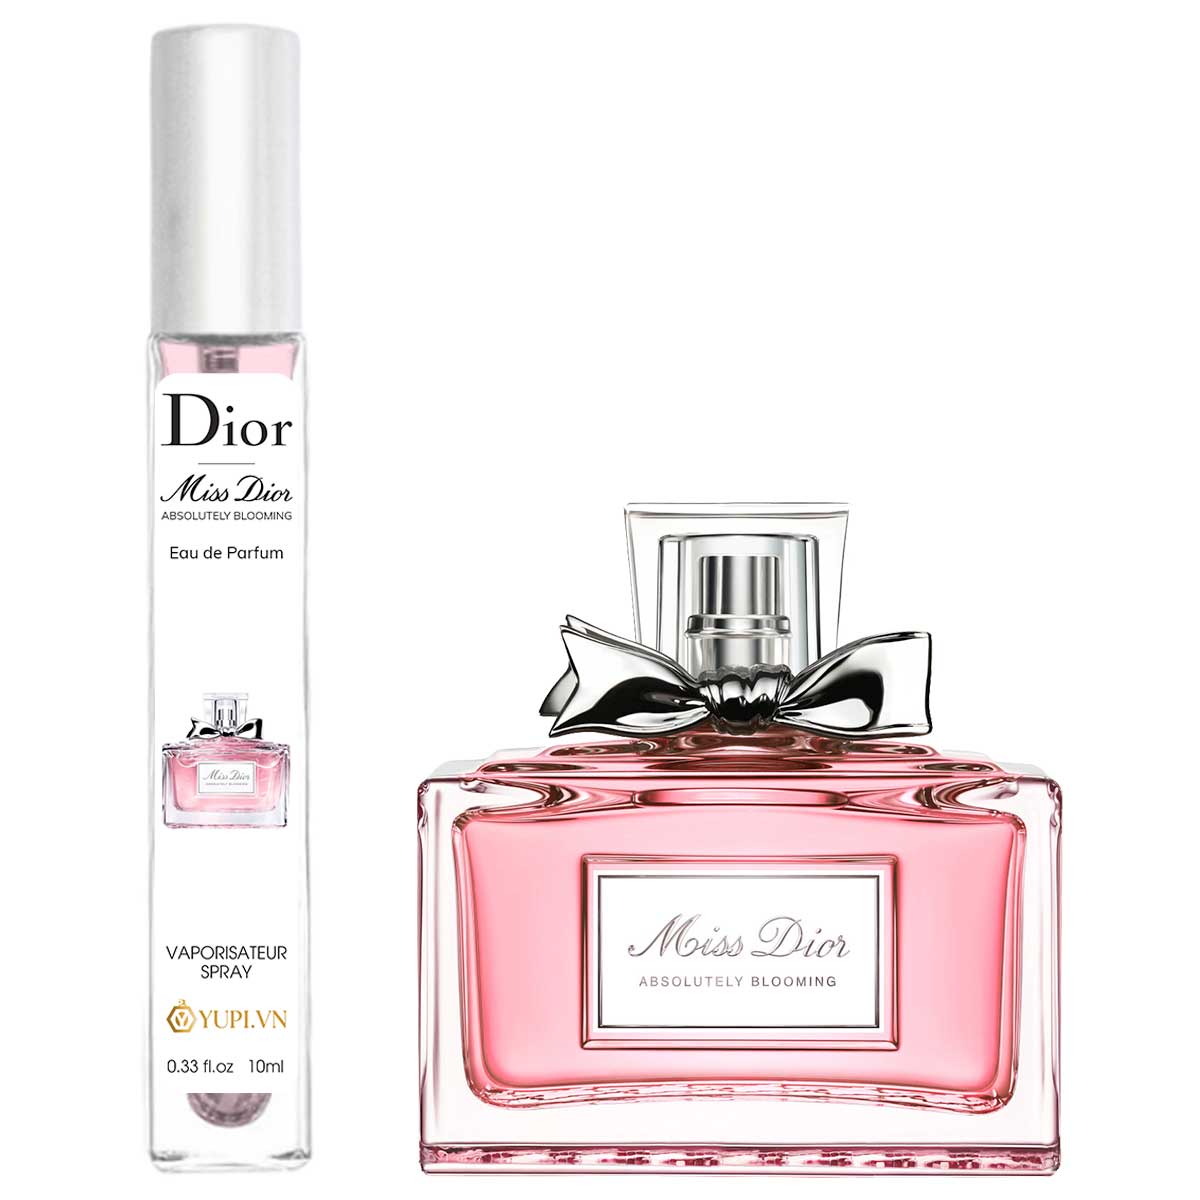 miss dior absolutely blooming edp chiet 10ml